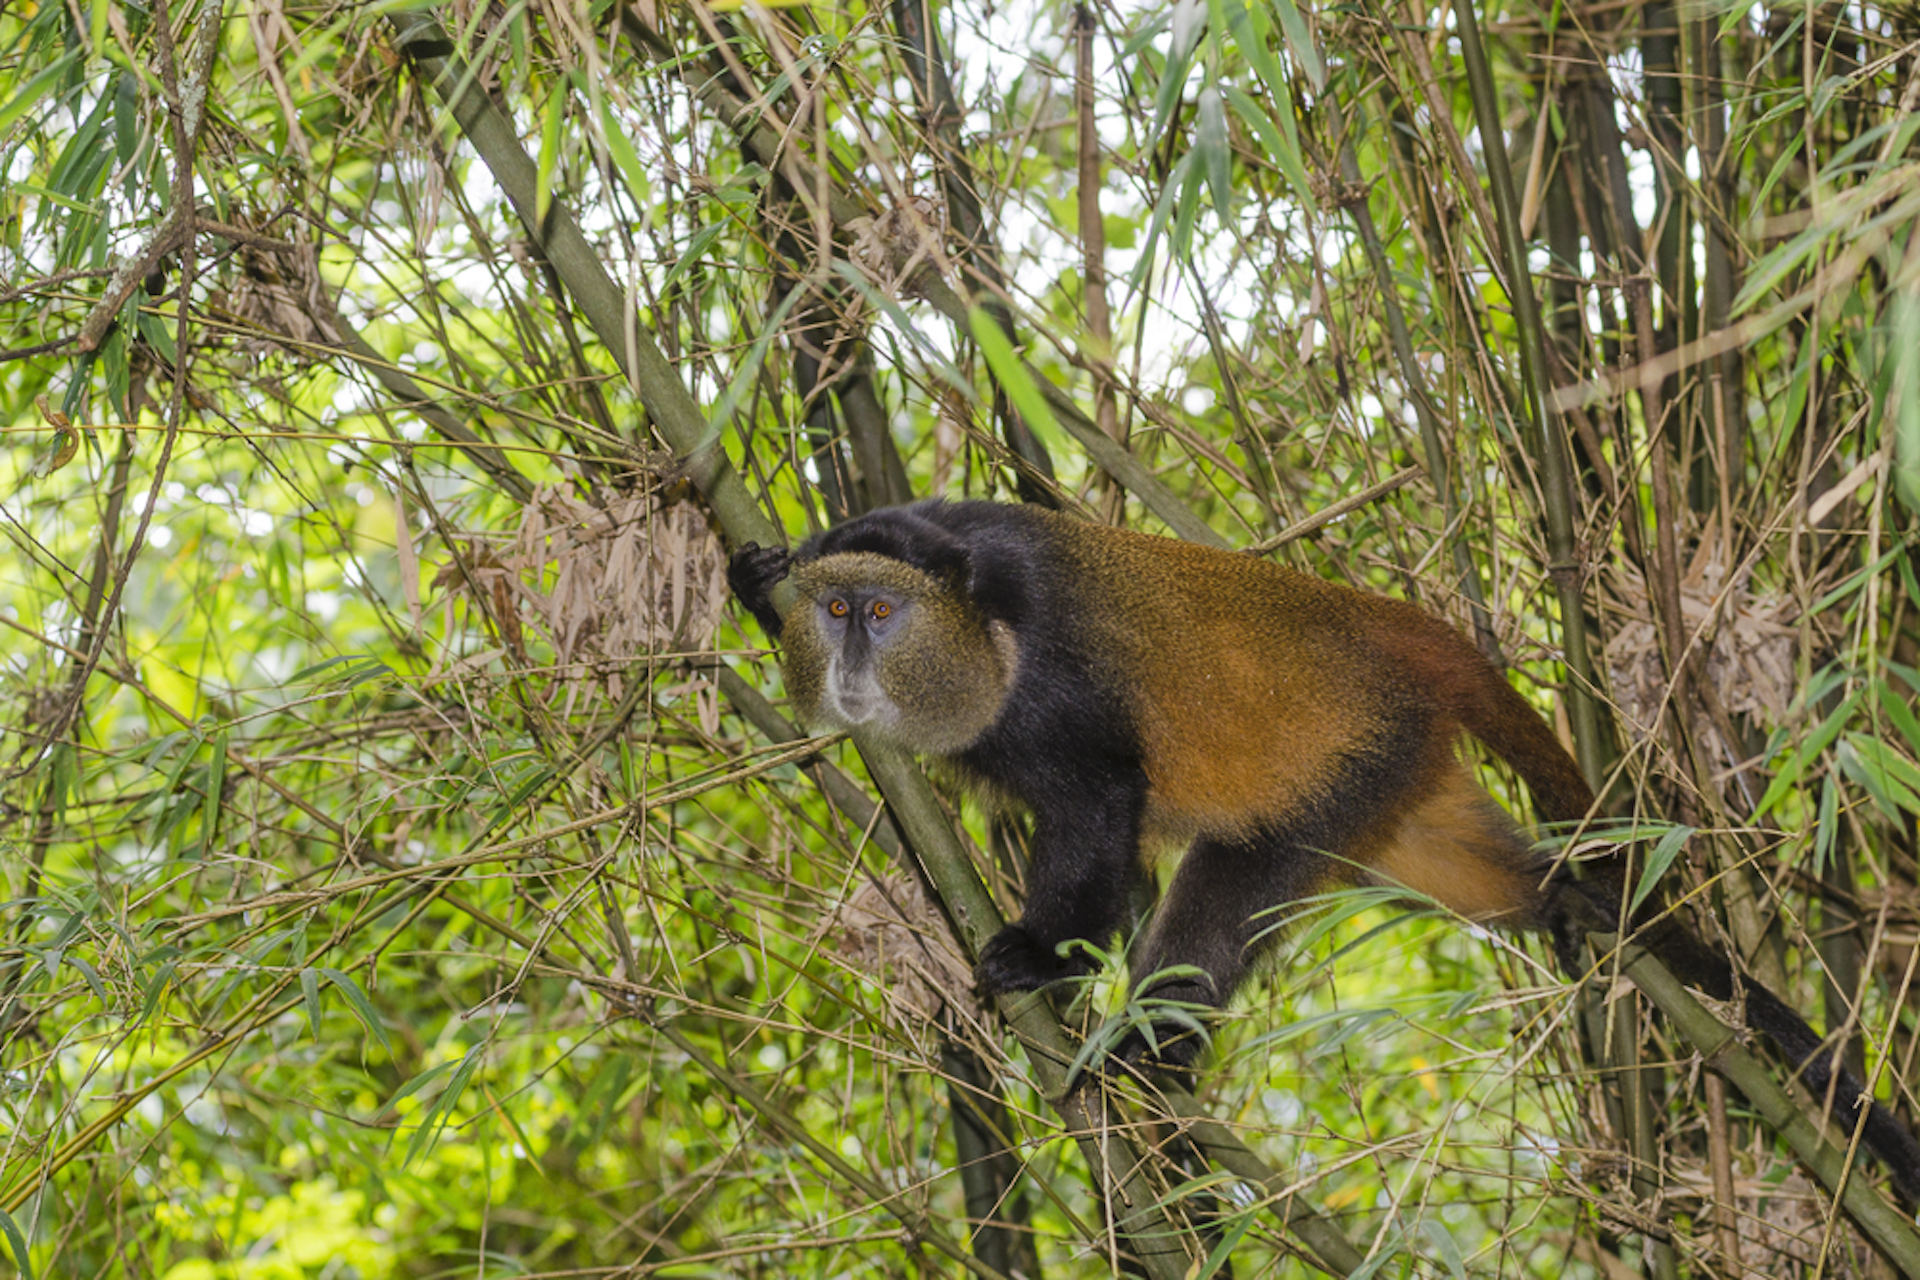 Monkey Sightseeing with World Adventure Tours